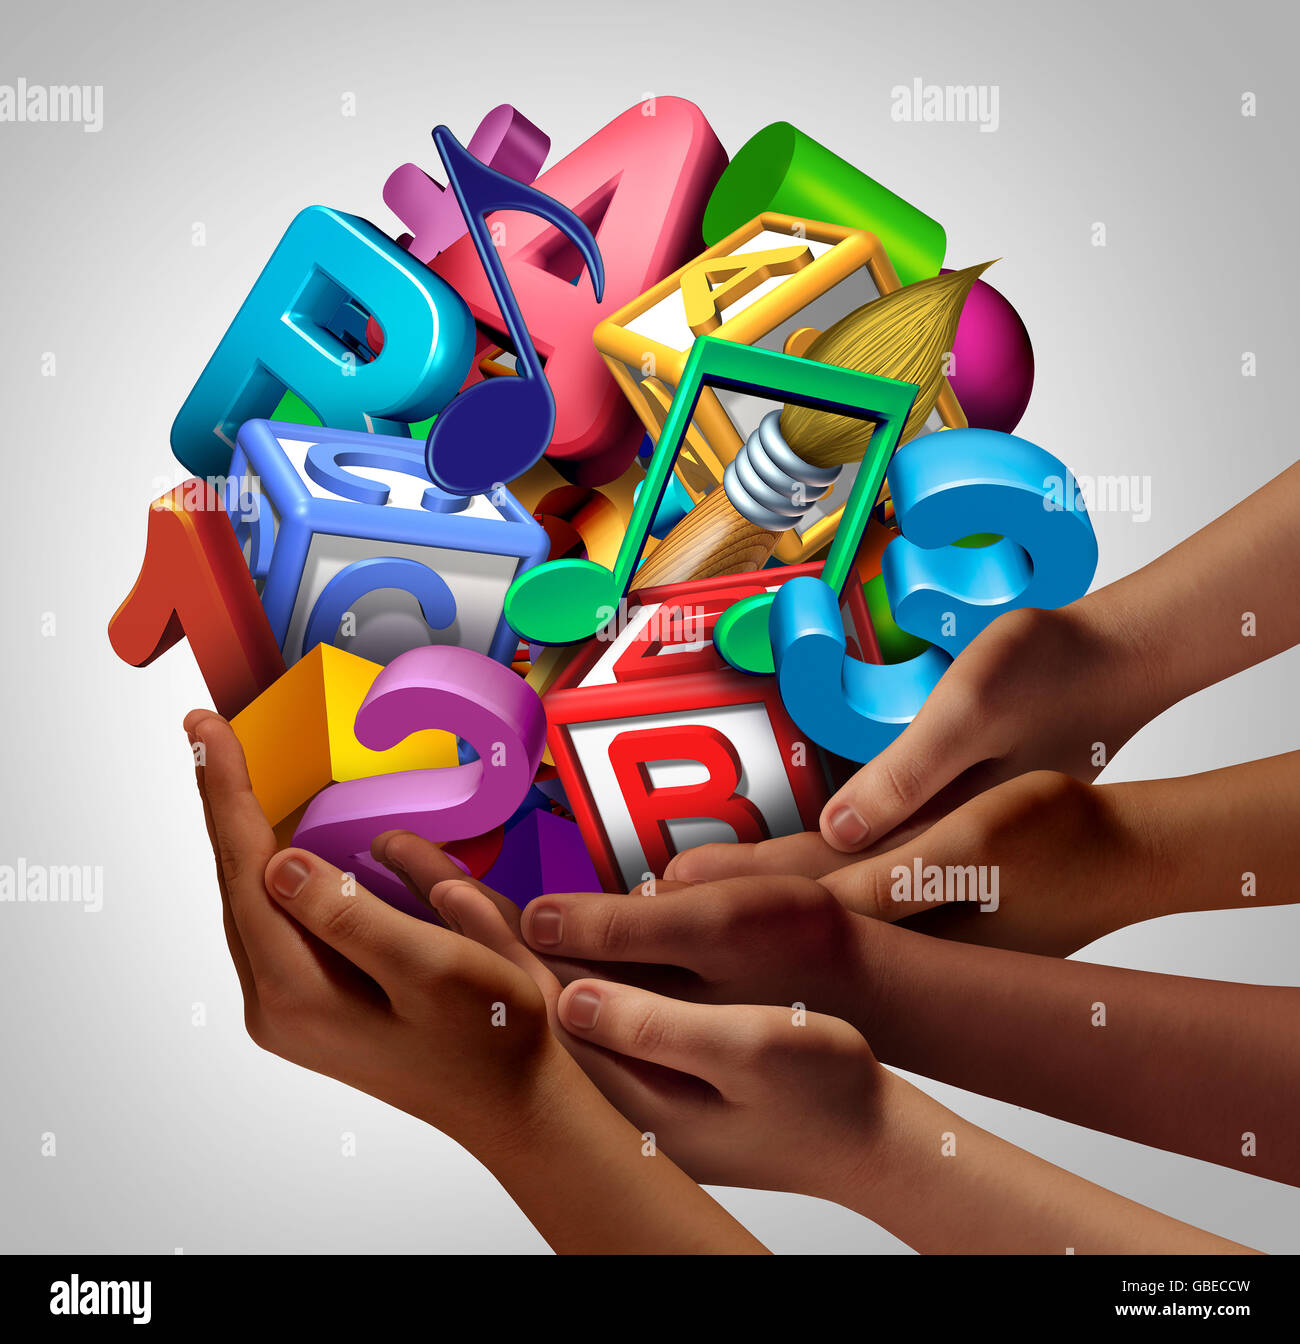 Group education partnership and community cooperation learning concept as a team of ethnic or diverse people joining together to suport symbols of school and teamwork training for students with 3D illustration elements. Stock Photo